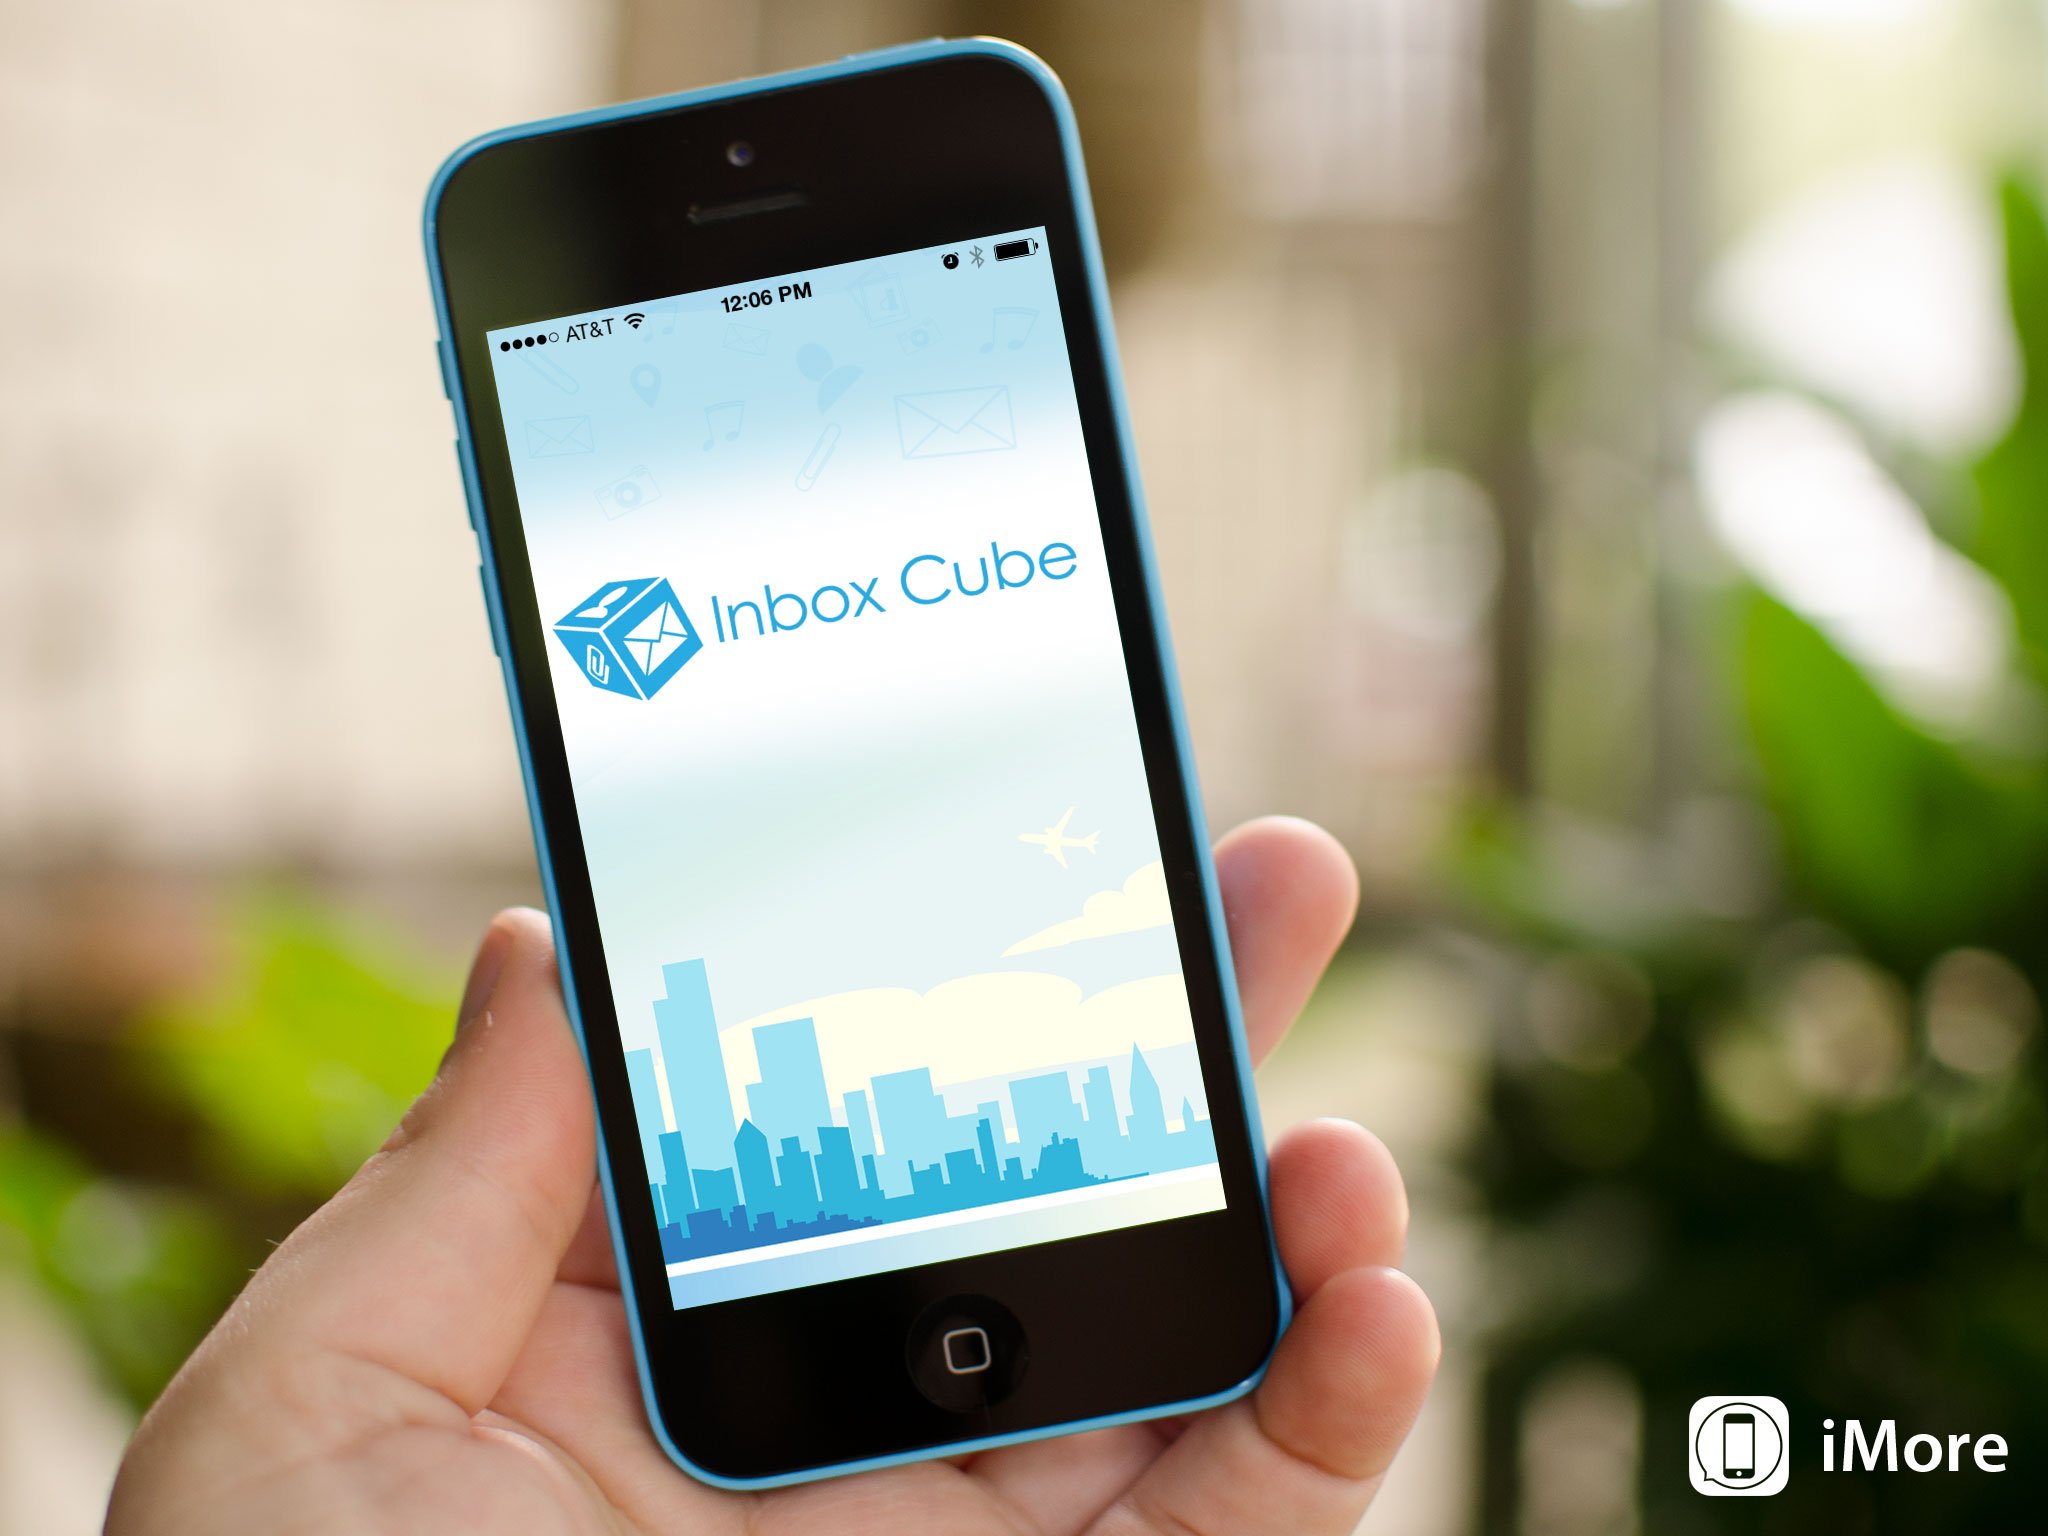 Inbox Cube for iPhone makes email visual, helps you spend less time looking for attachments and files